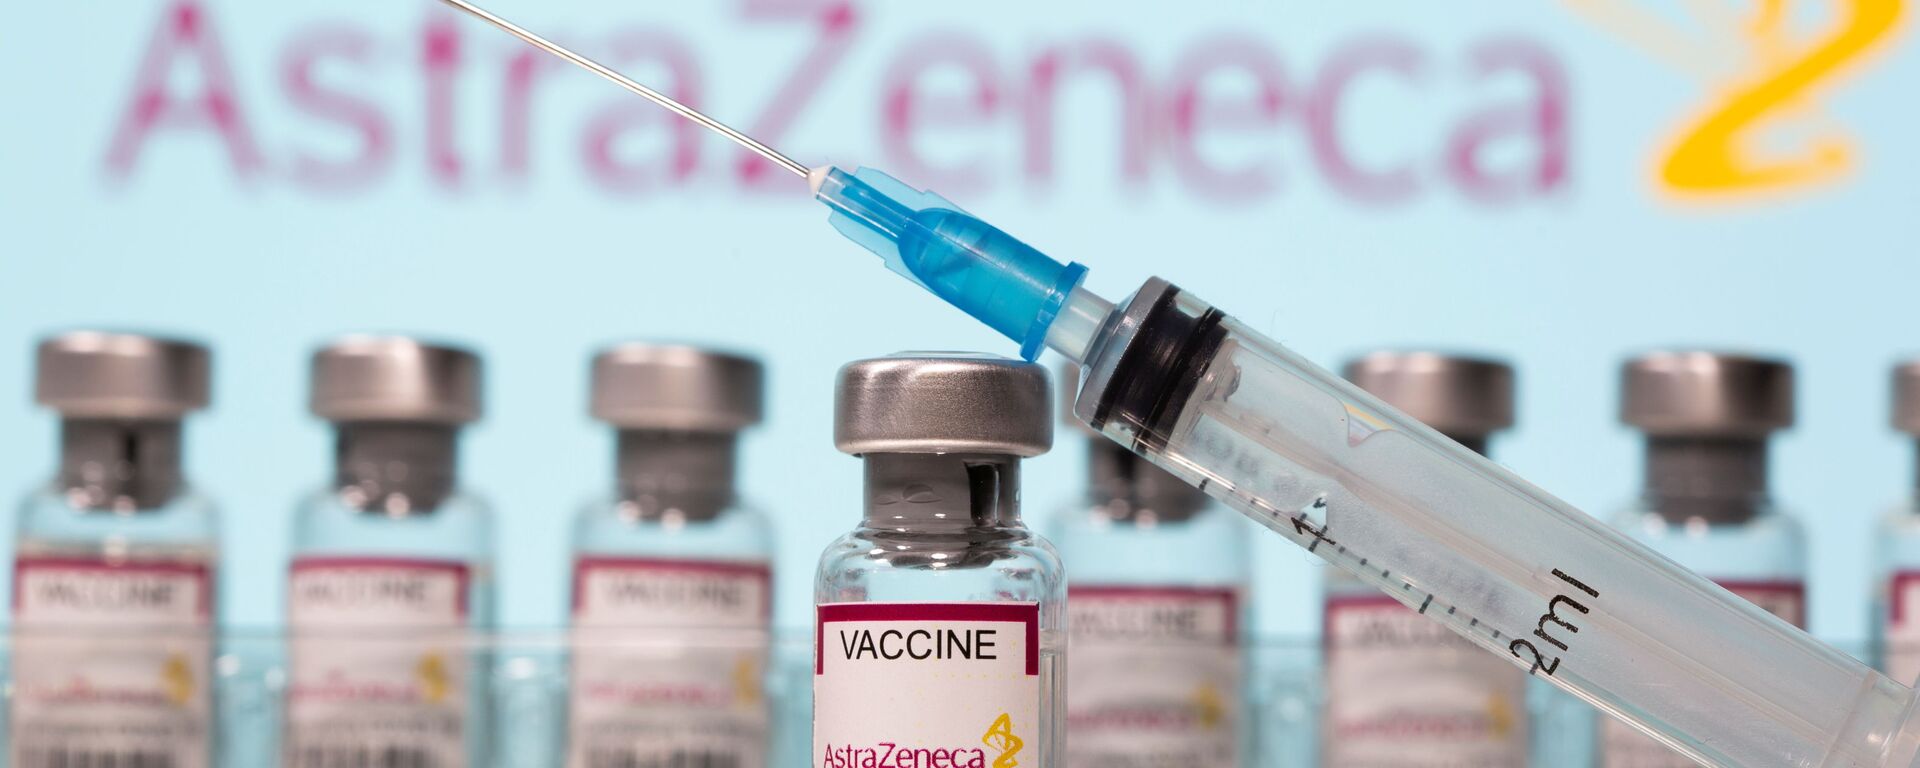 Vials labelled AstraZeneca COVID-19 Coronavirus Vaccine and a syringe are seen in front of a displayed AstraZeneca logo in this illustration taken March 10, 2021. REUTERS/Dado Ruvic/Illustration - Sputnik International, 1920, 12.05.2021